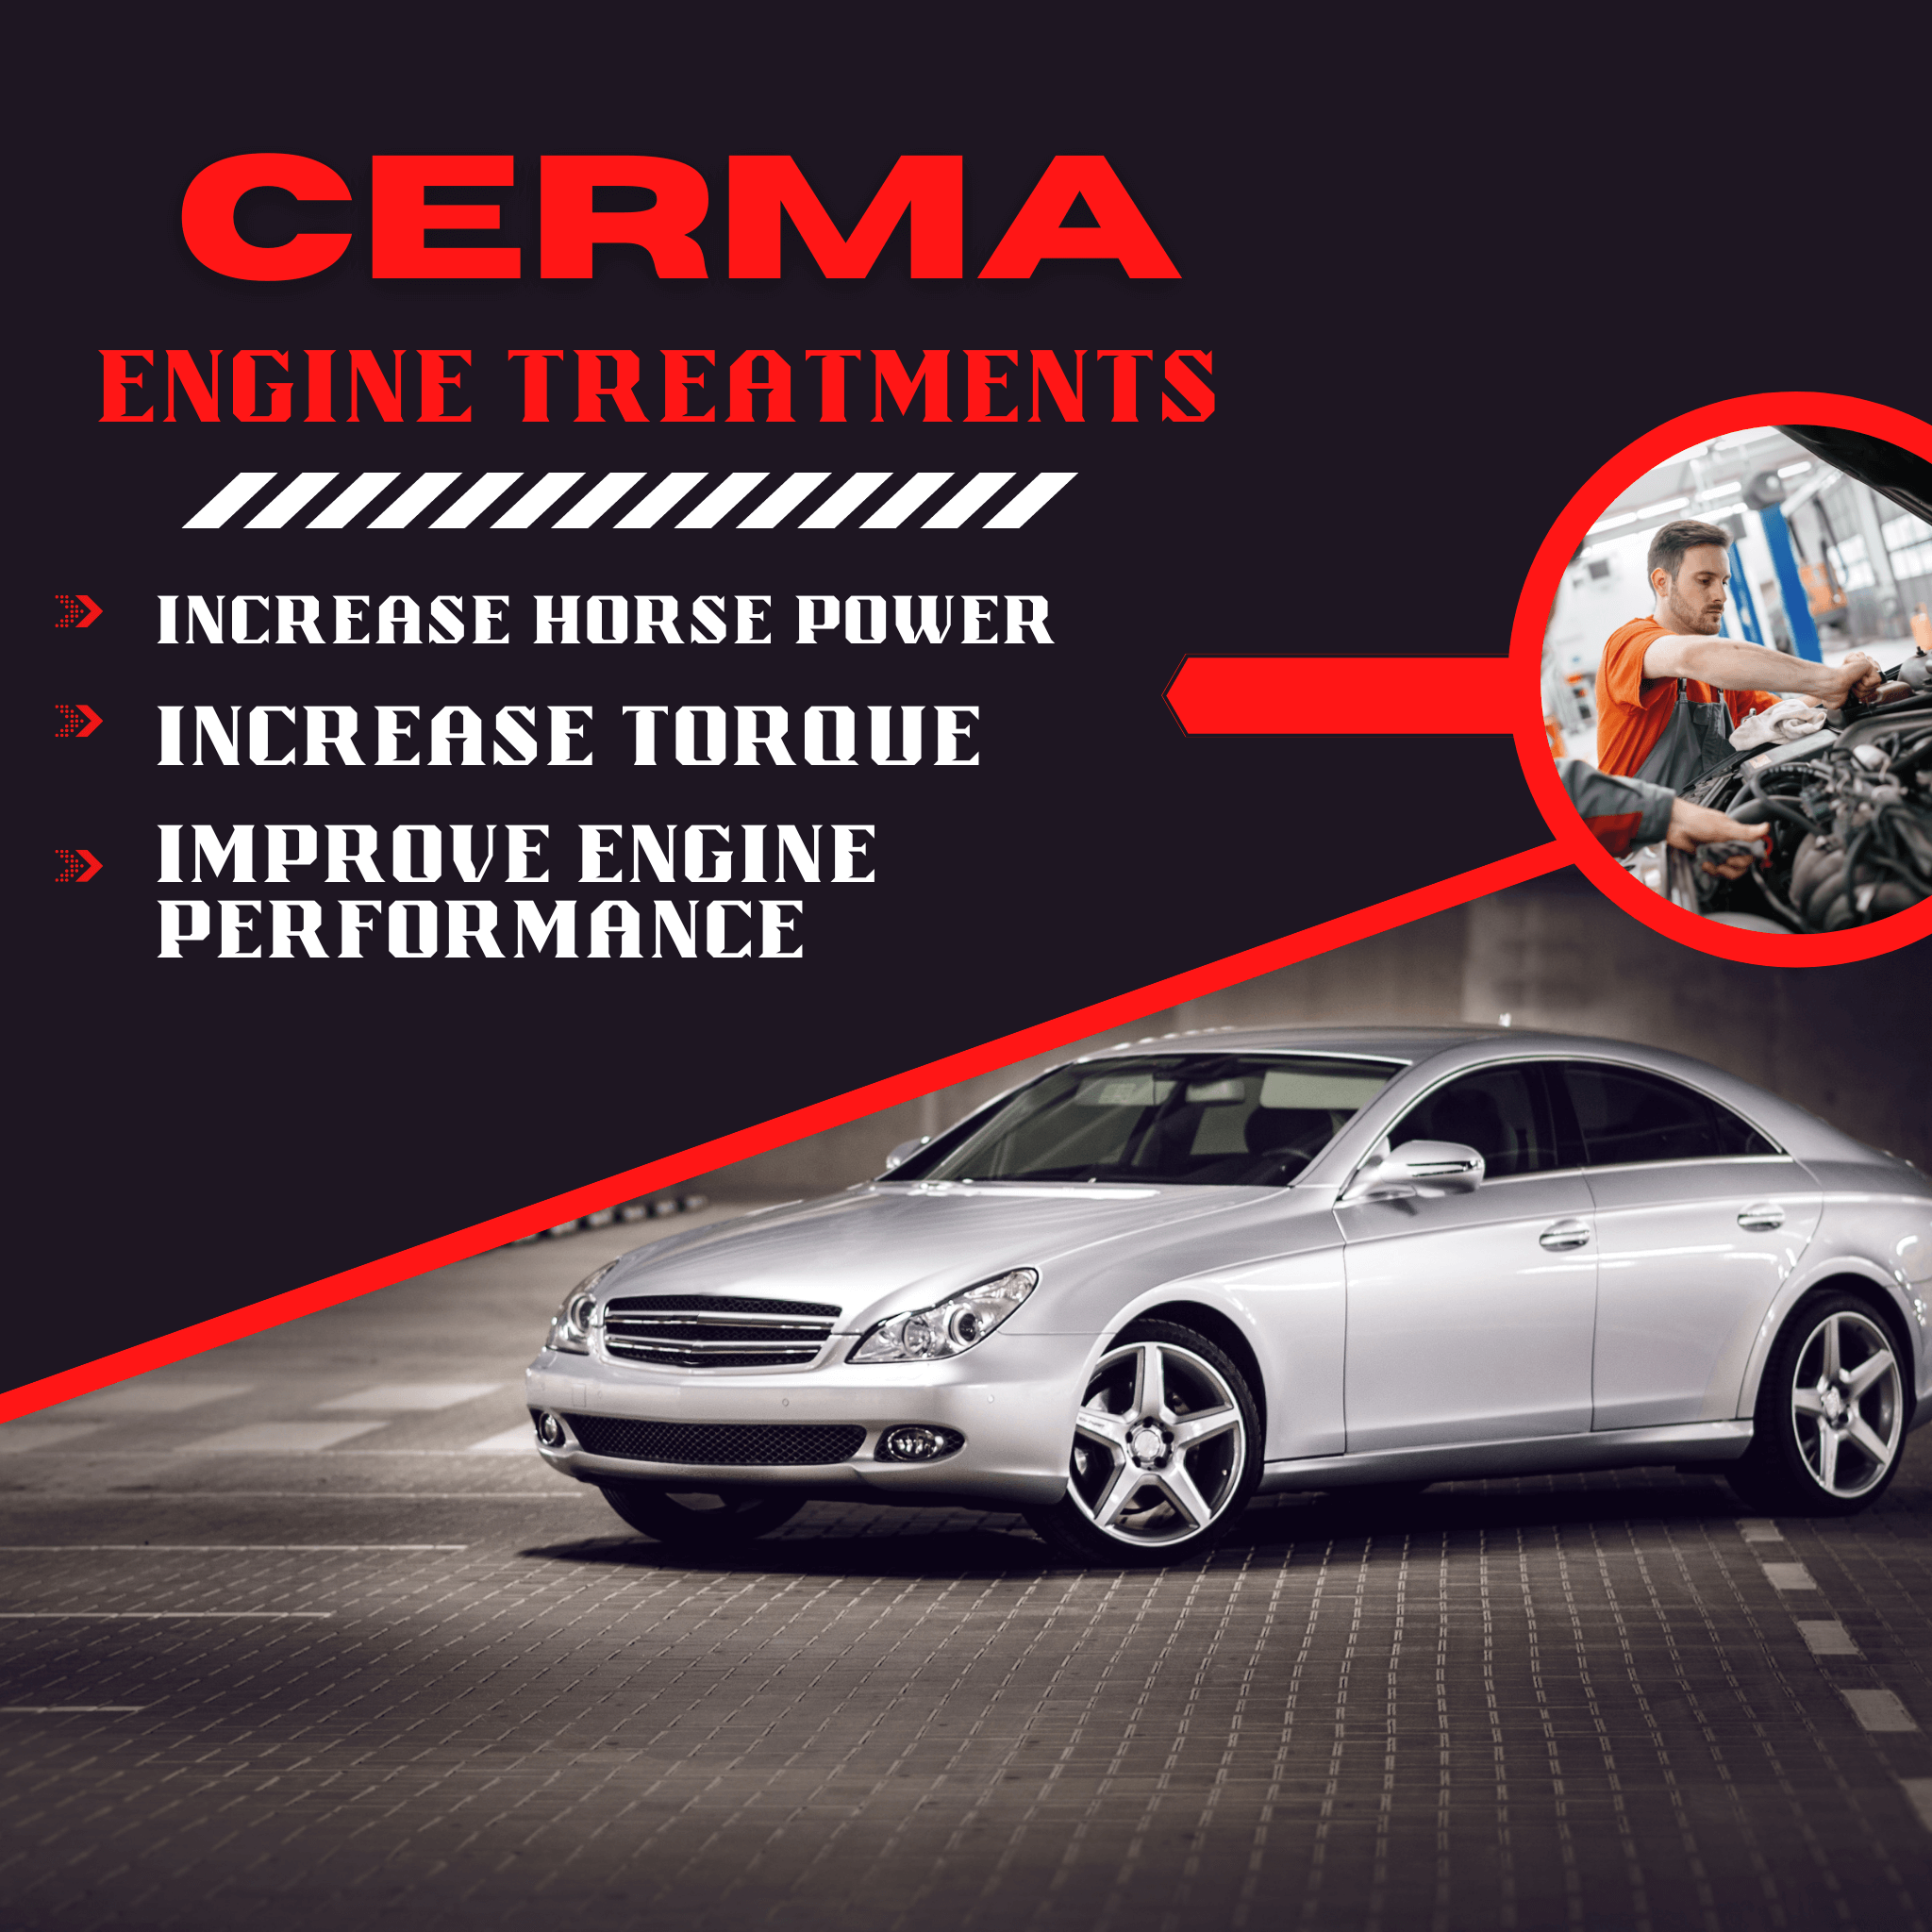 Boost Your Car's Power with Cerma Engine Treatments | Increase Horsepower and Torque